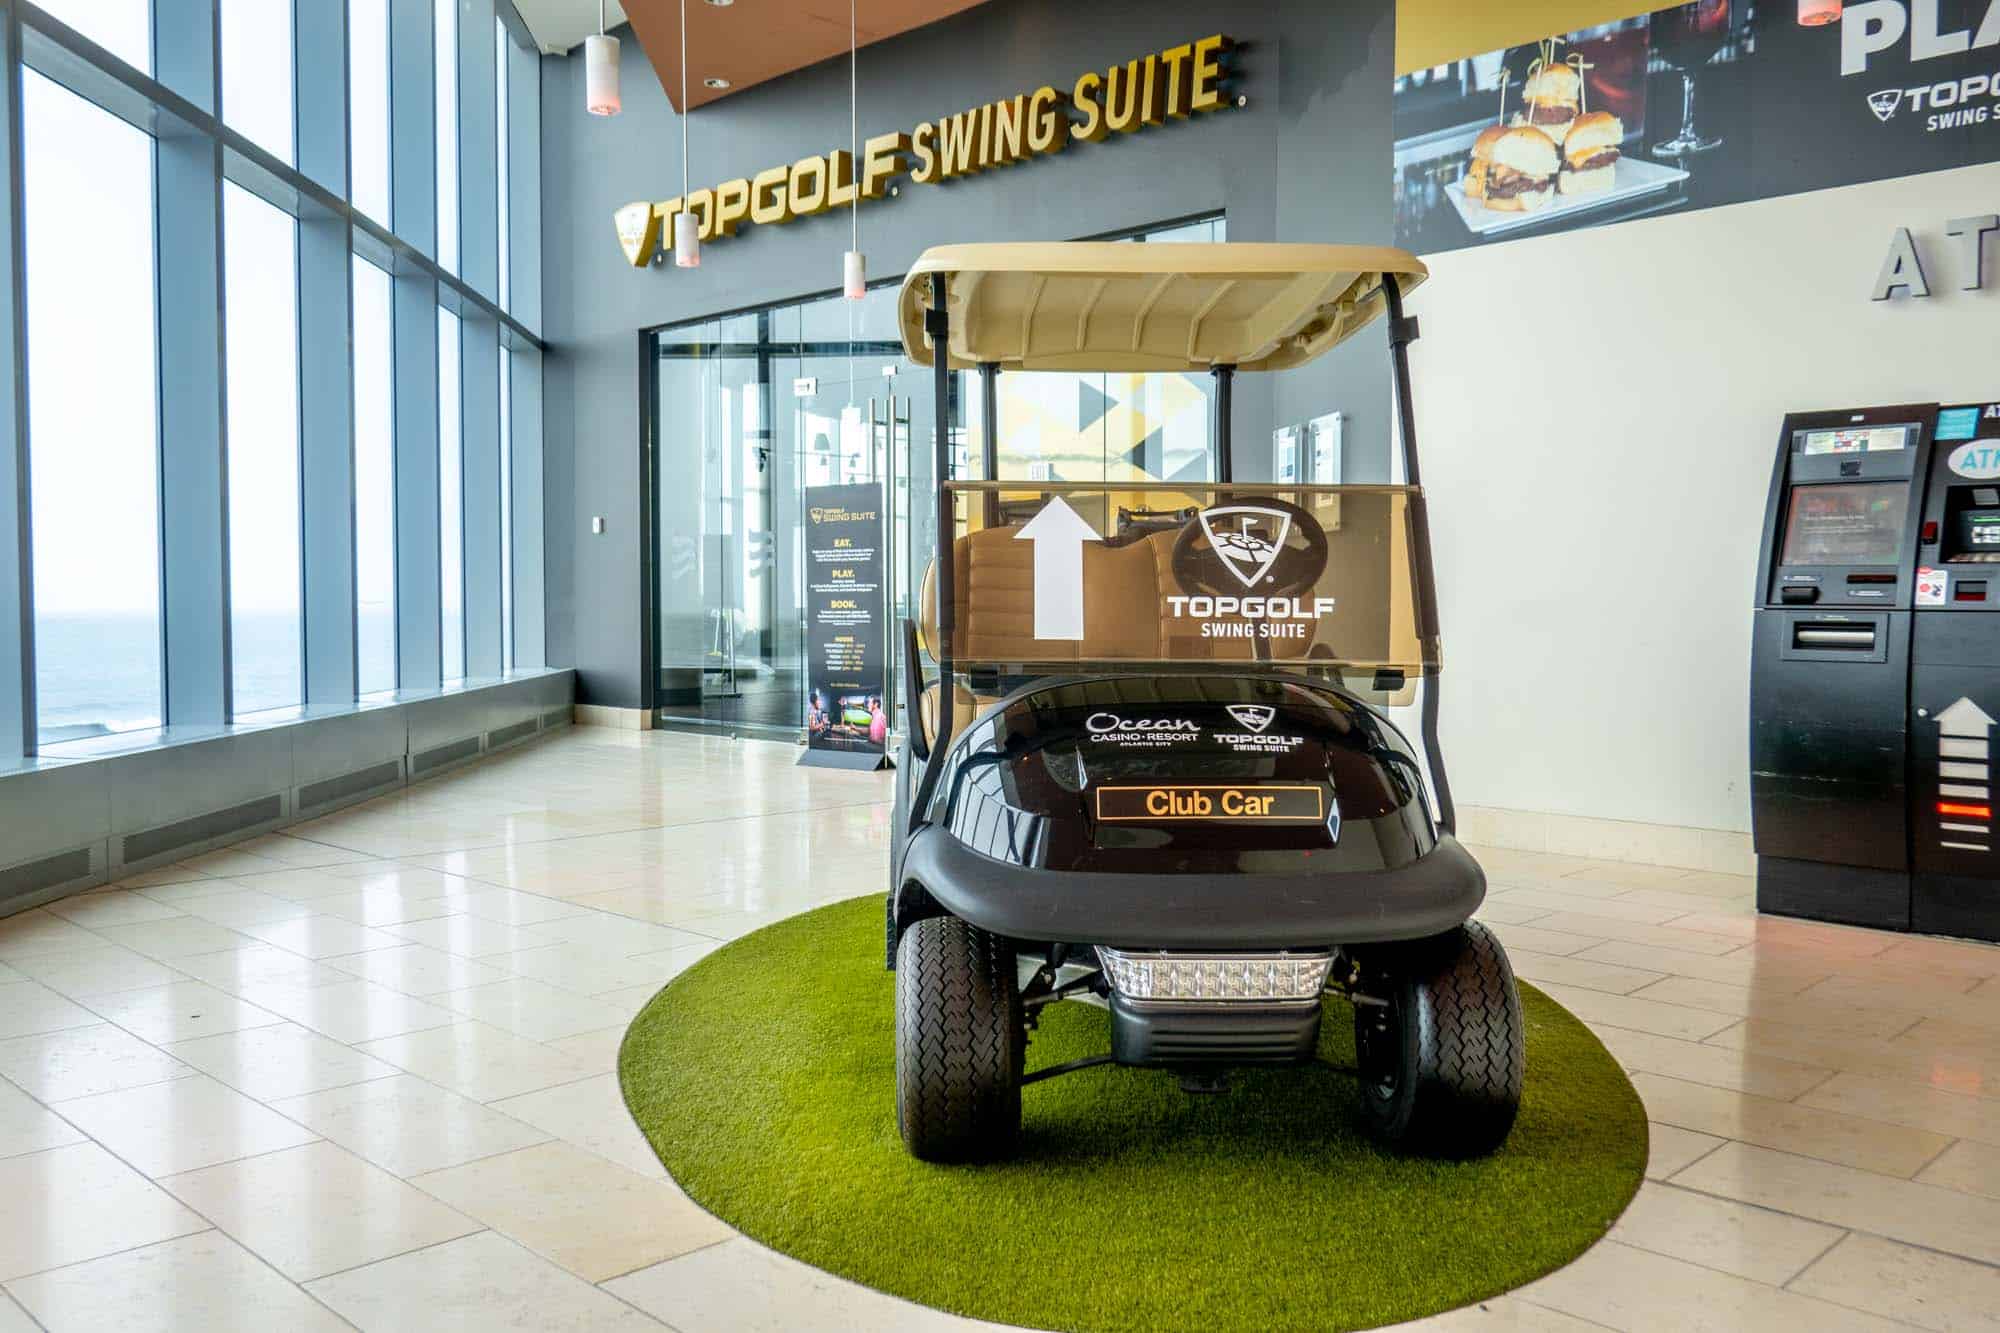 Golf cart indoors, outside of a business with a sign for "Topgolf Swing Suite."